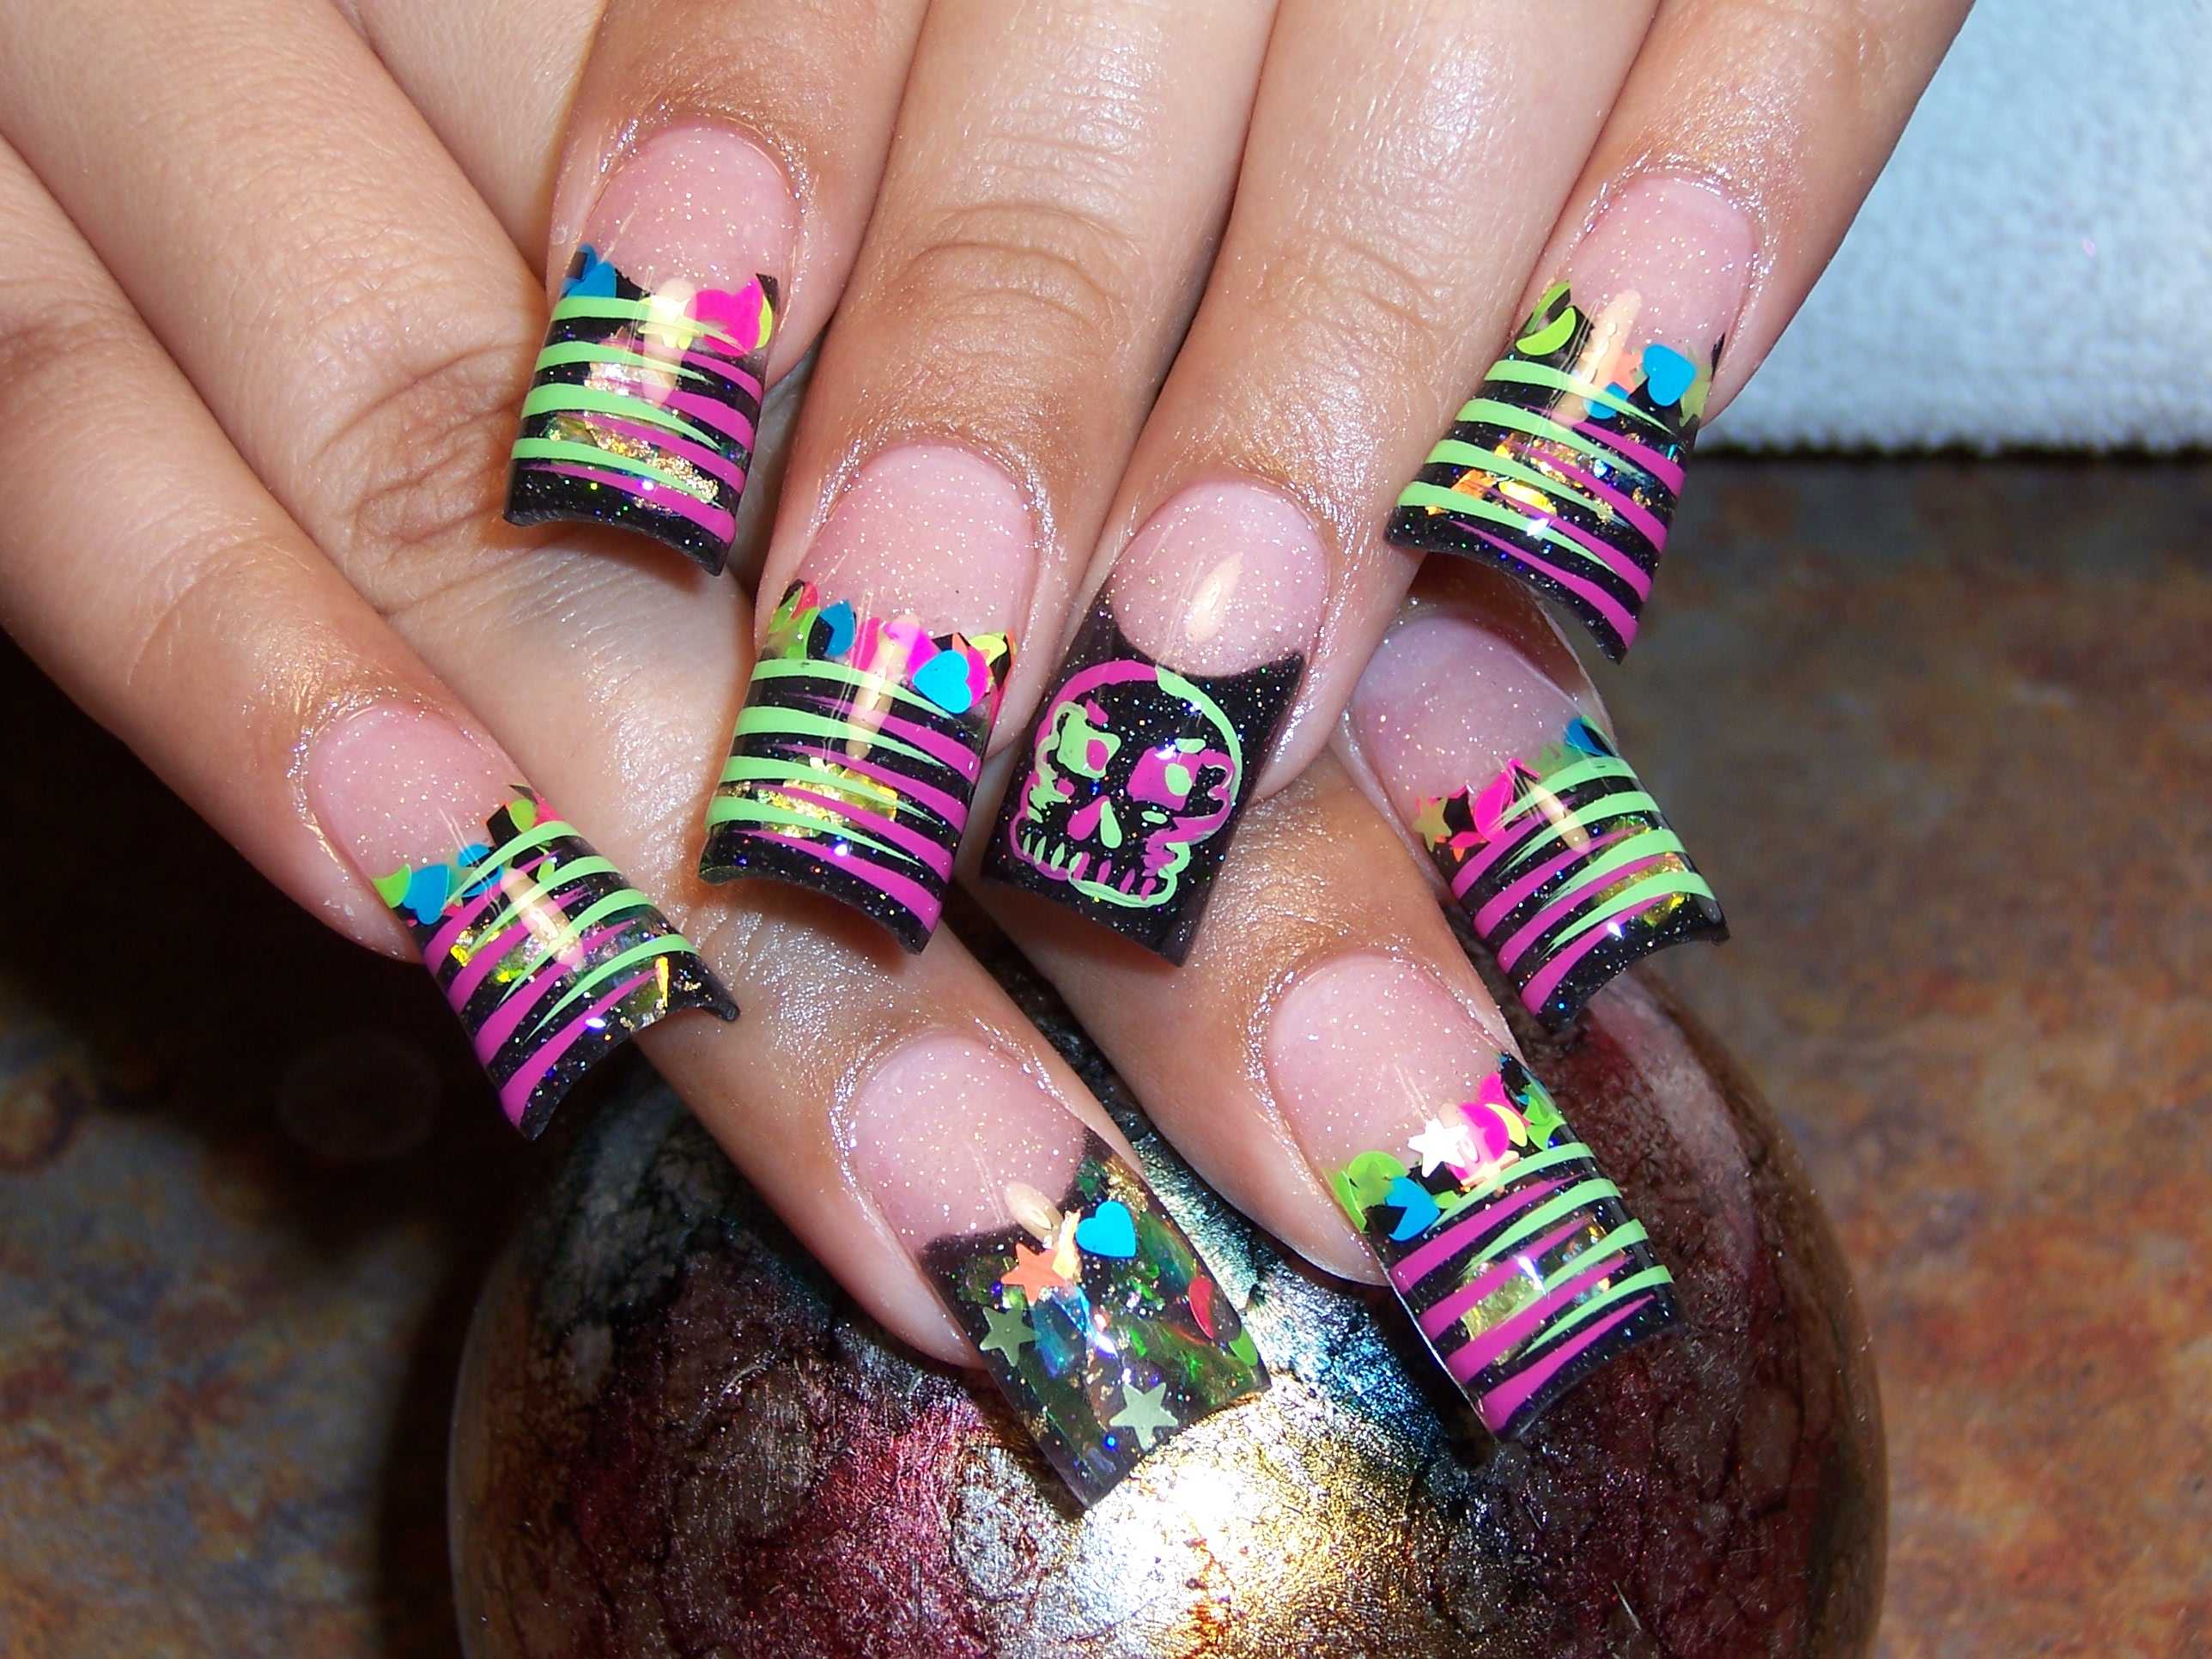 1. "Top 10 Colorful Nail Art Designs for 2024" - wide 6